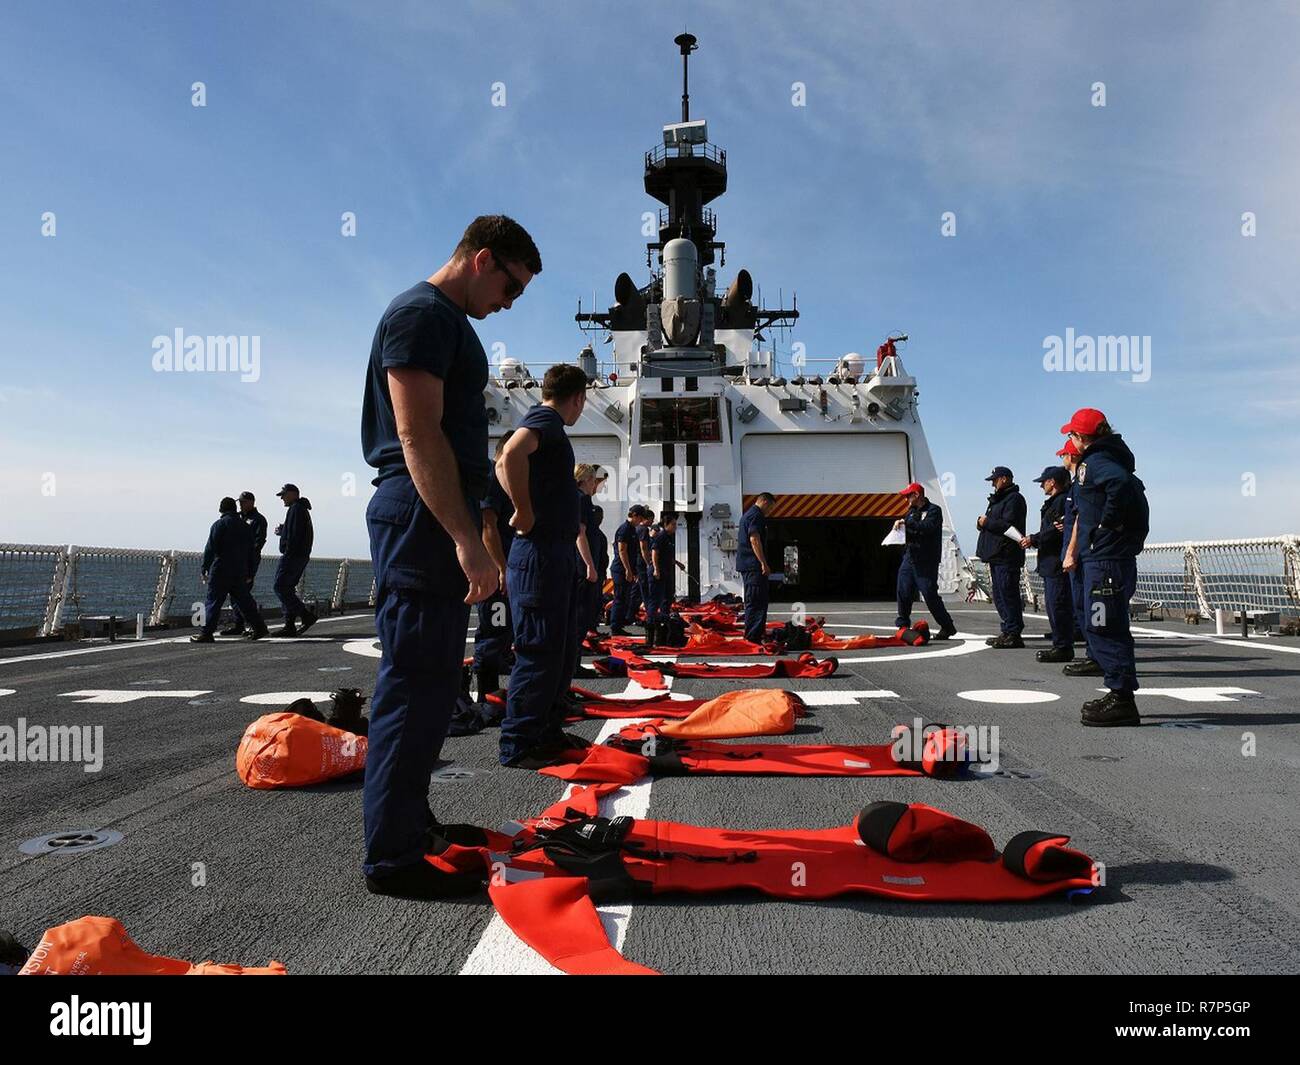 Crewmembers line up on the flight deck with their cold-water immersion or 'Gumby' suits during a cold water survival training drill aboard the Coast Guard Cutter Munro, Mar. 26, 2017. The crew had only 60 seconds to quickly and accurately put on their suits, simulating preparation for abandoning the ship in the event of an emergency. U.S. Coast Guard Stock Photo